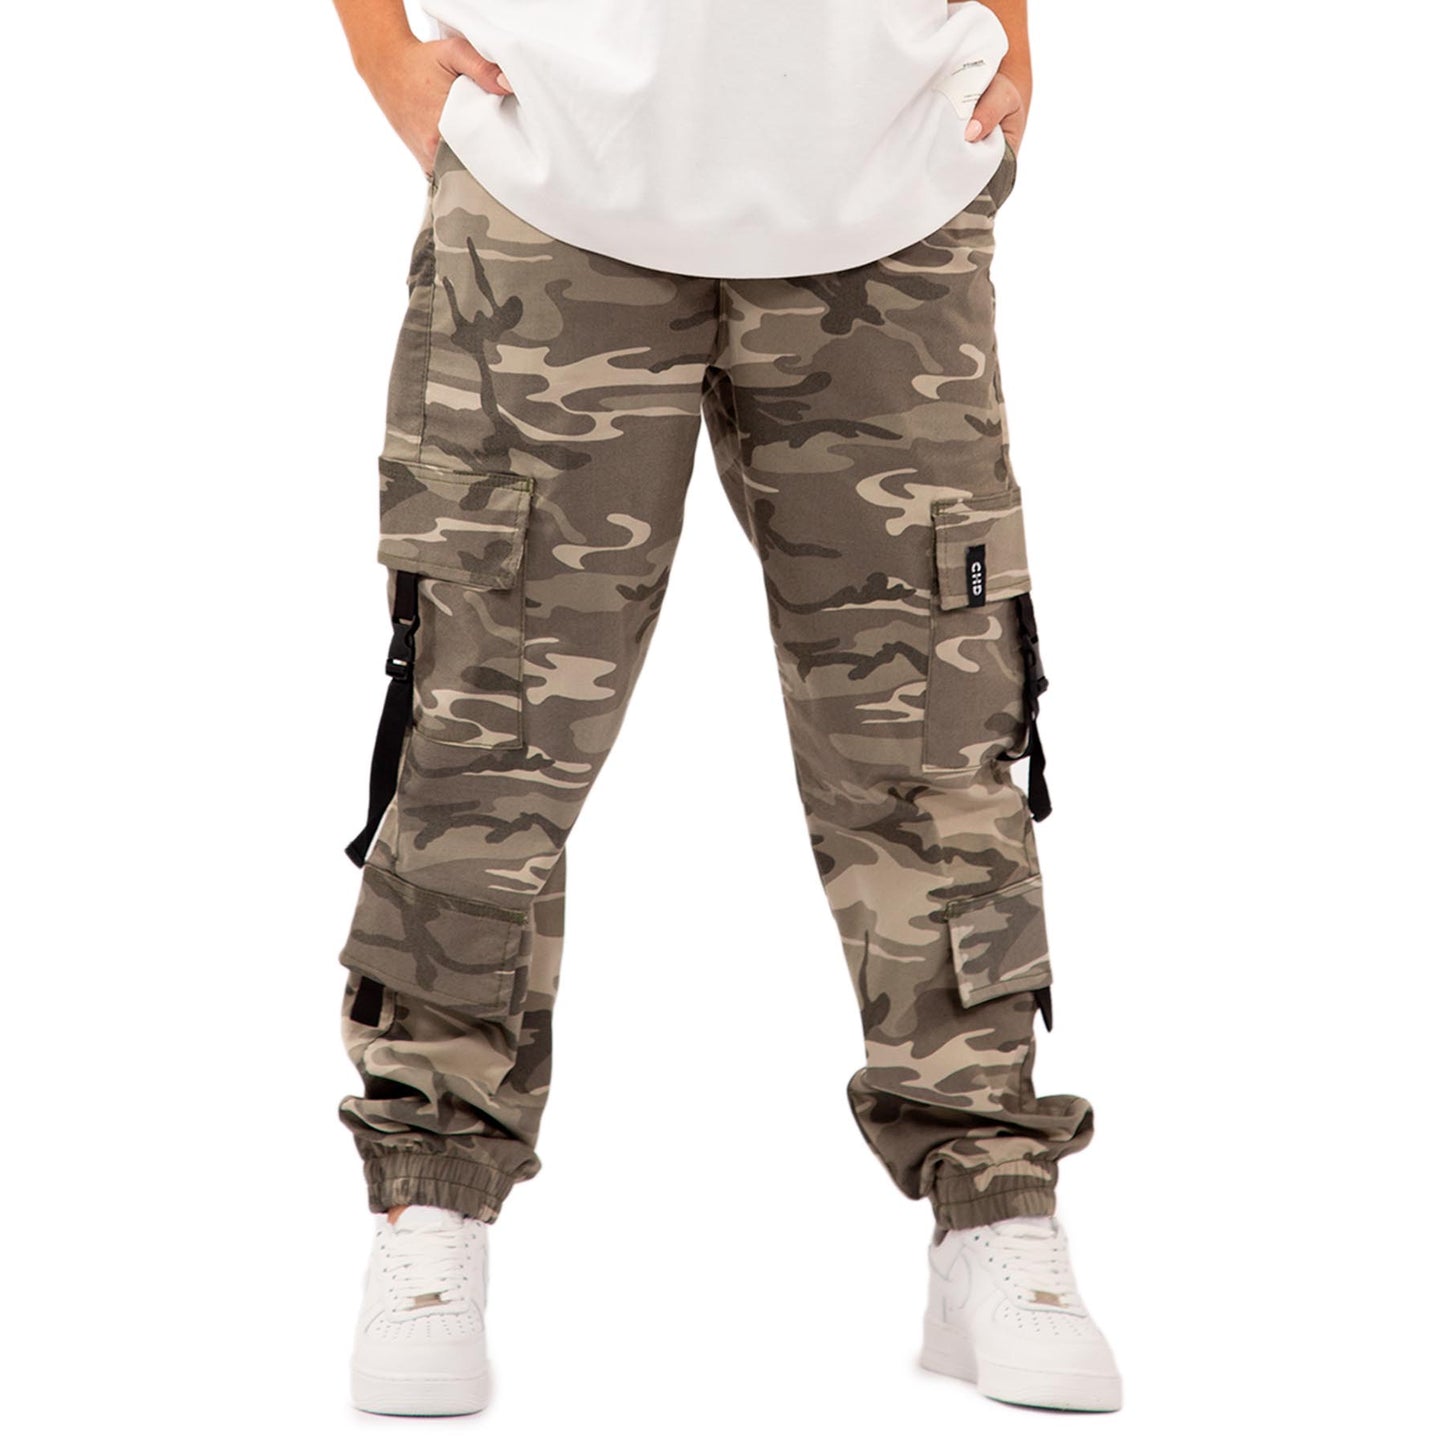 Wild cammo Double Cargo Pants Mujer color: VERDE 8120